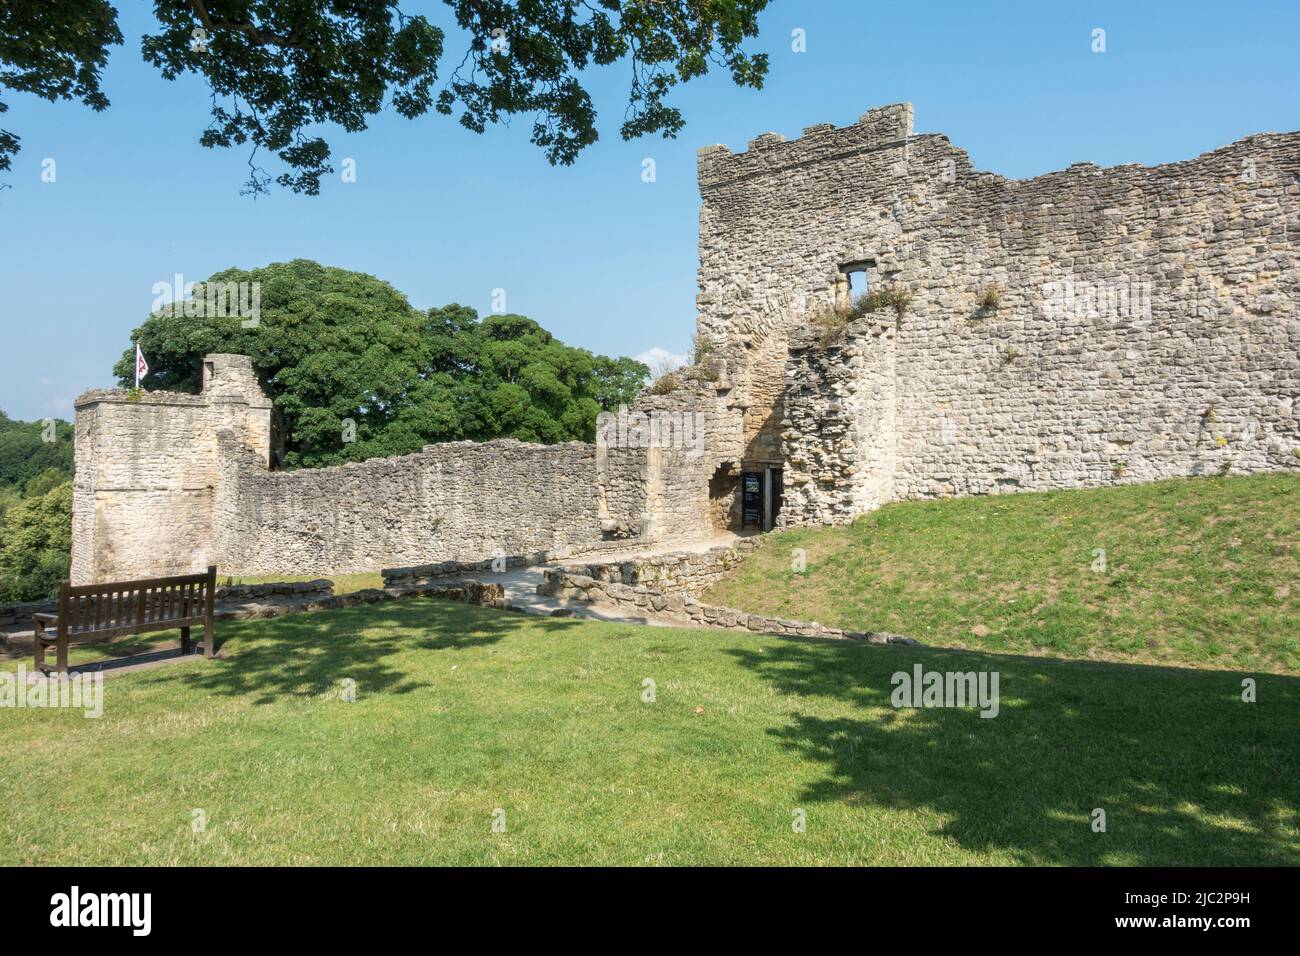 Exterior and main entrance to Pickering Castle, a motte-and-bailey fortification in Pickering, North Yorkshire, England. Stock Photo